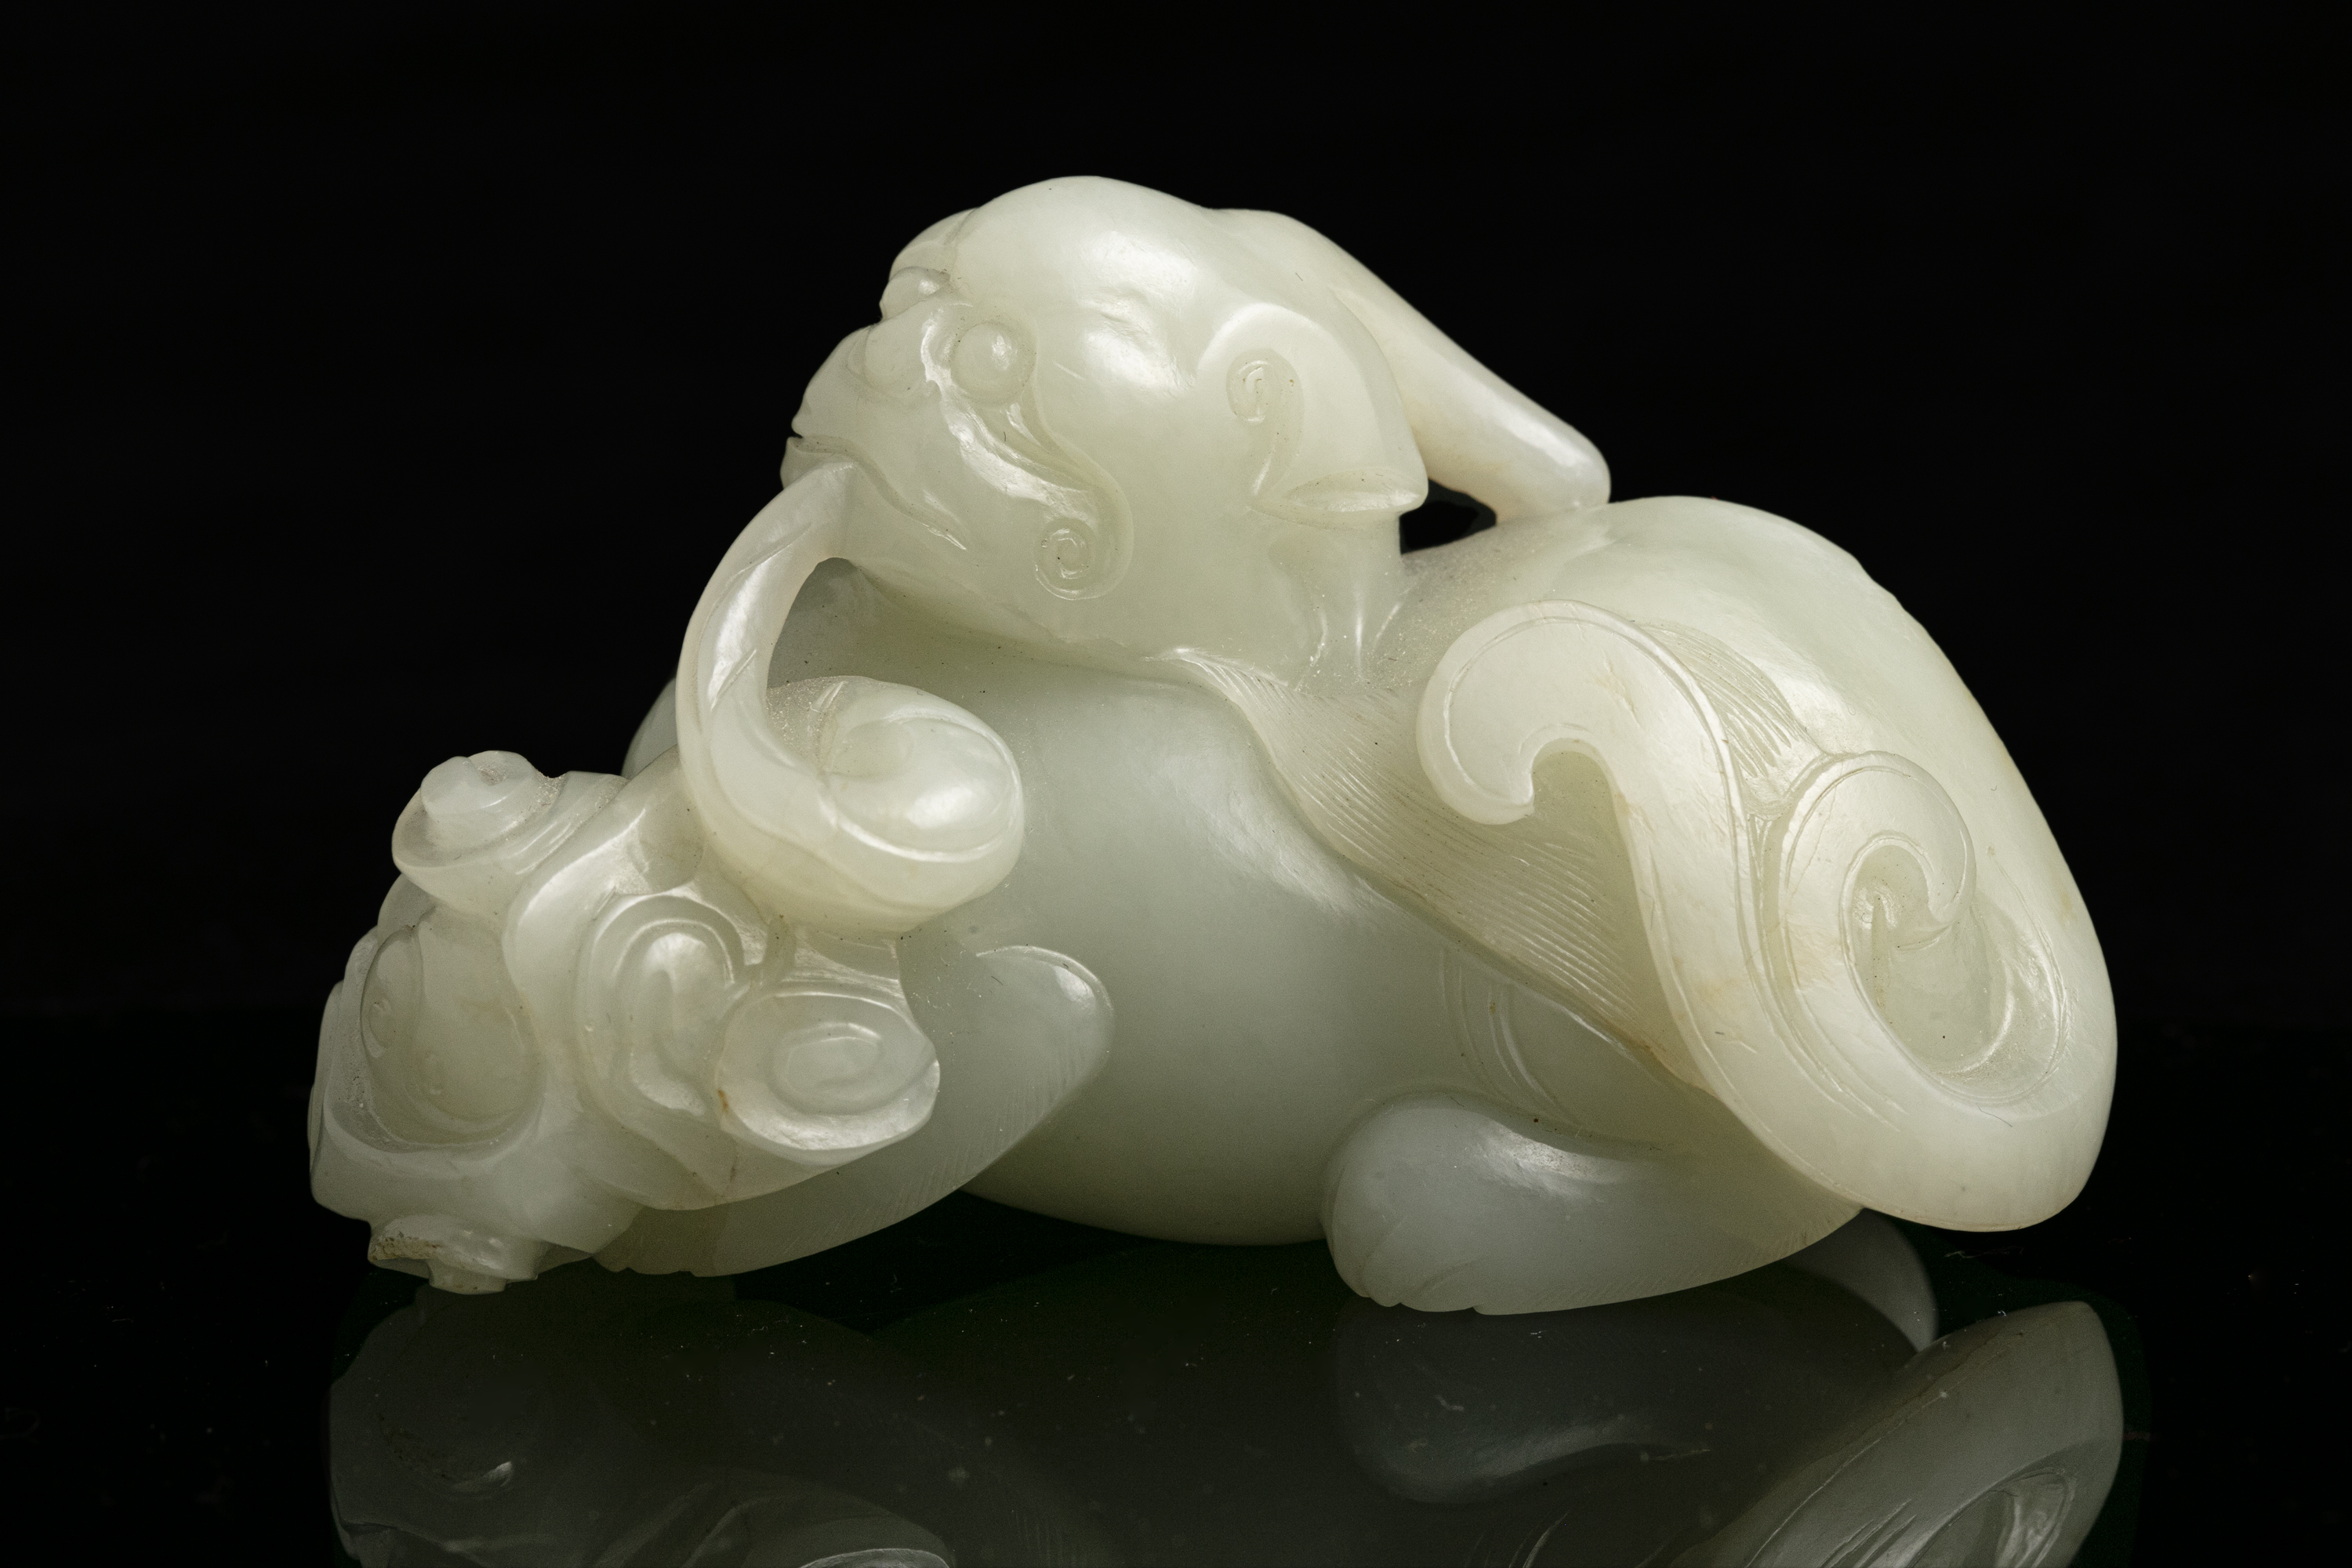 A JADE CARVING OF A PIXIE / BIXIE China, Qing Dynasty, 18th to 19th century Offered at auction